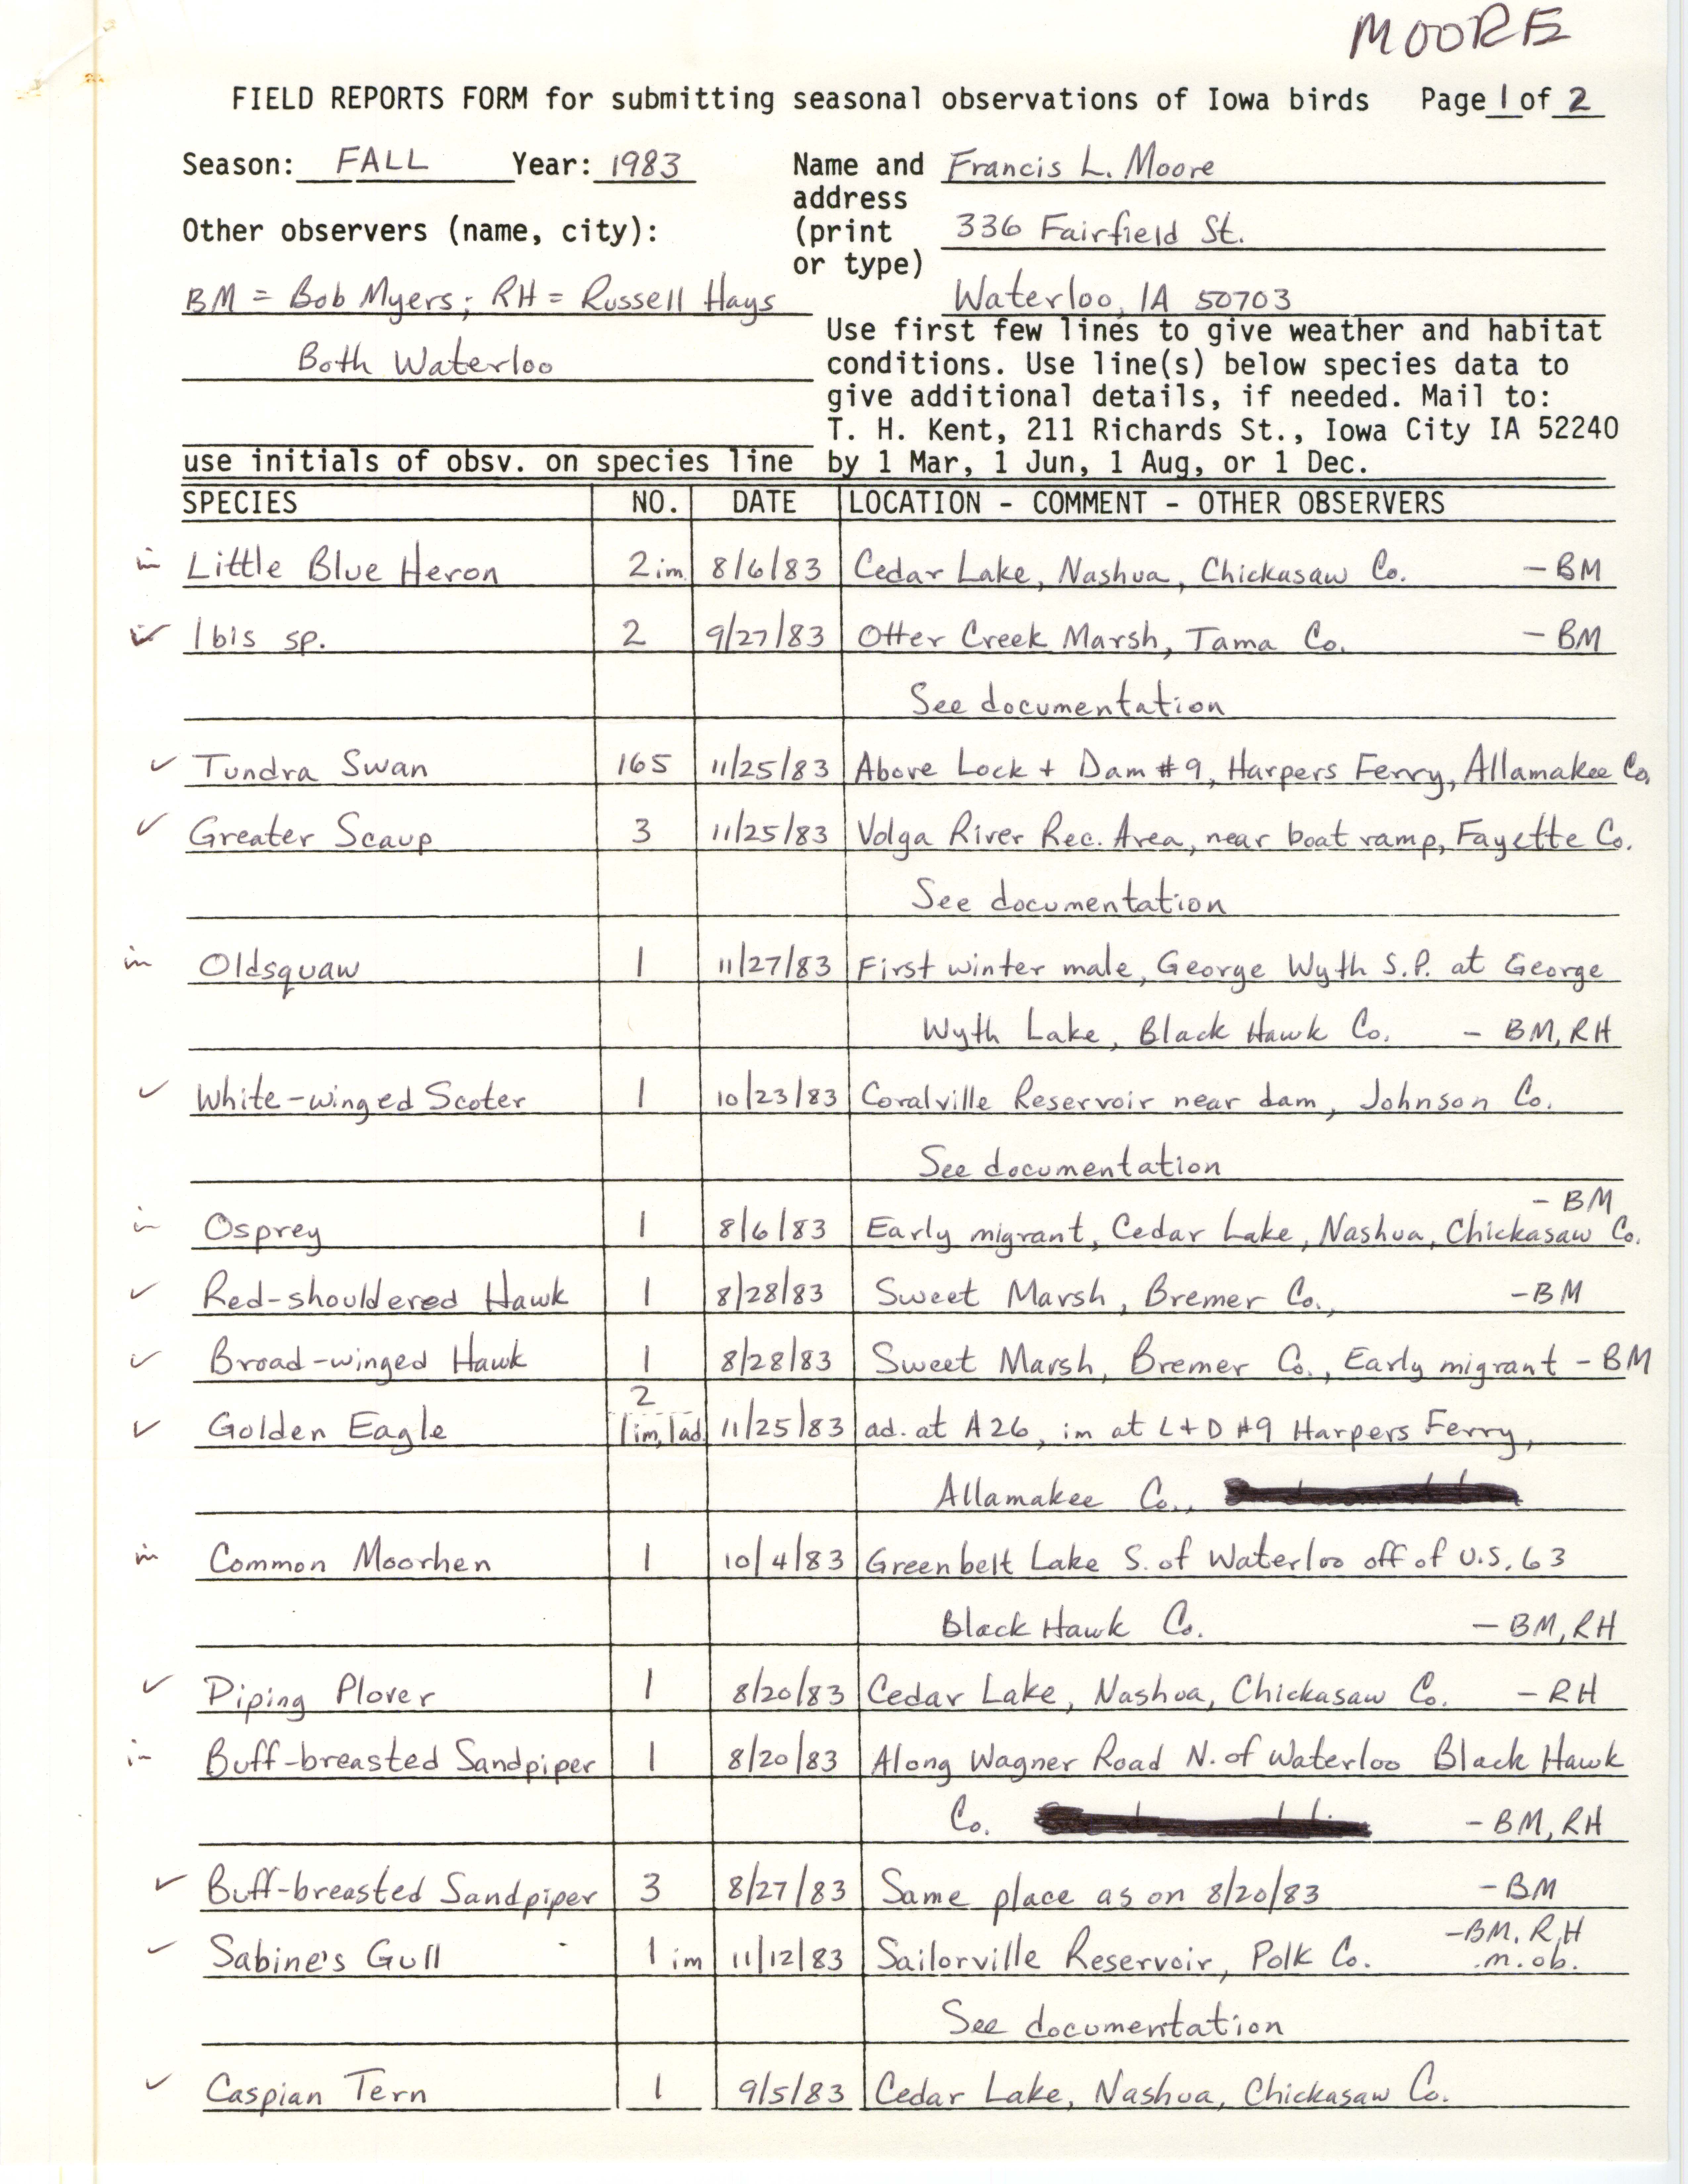 Field reports form for submitting seasonal observations of Iowa birds, Francis L. Moore, fall 1983